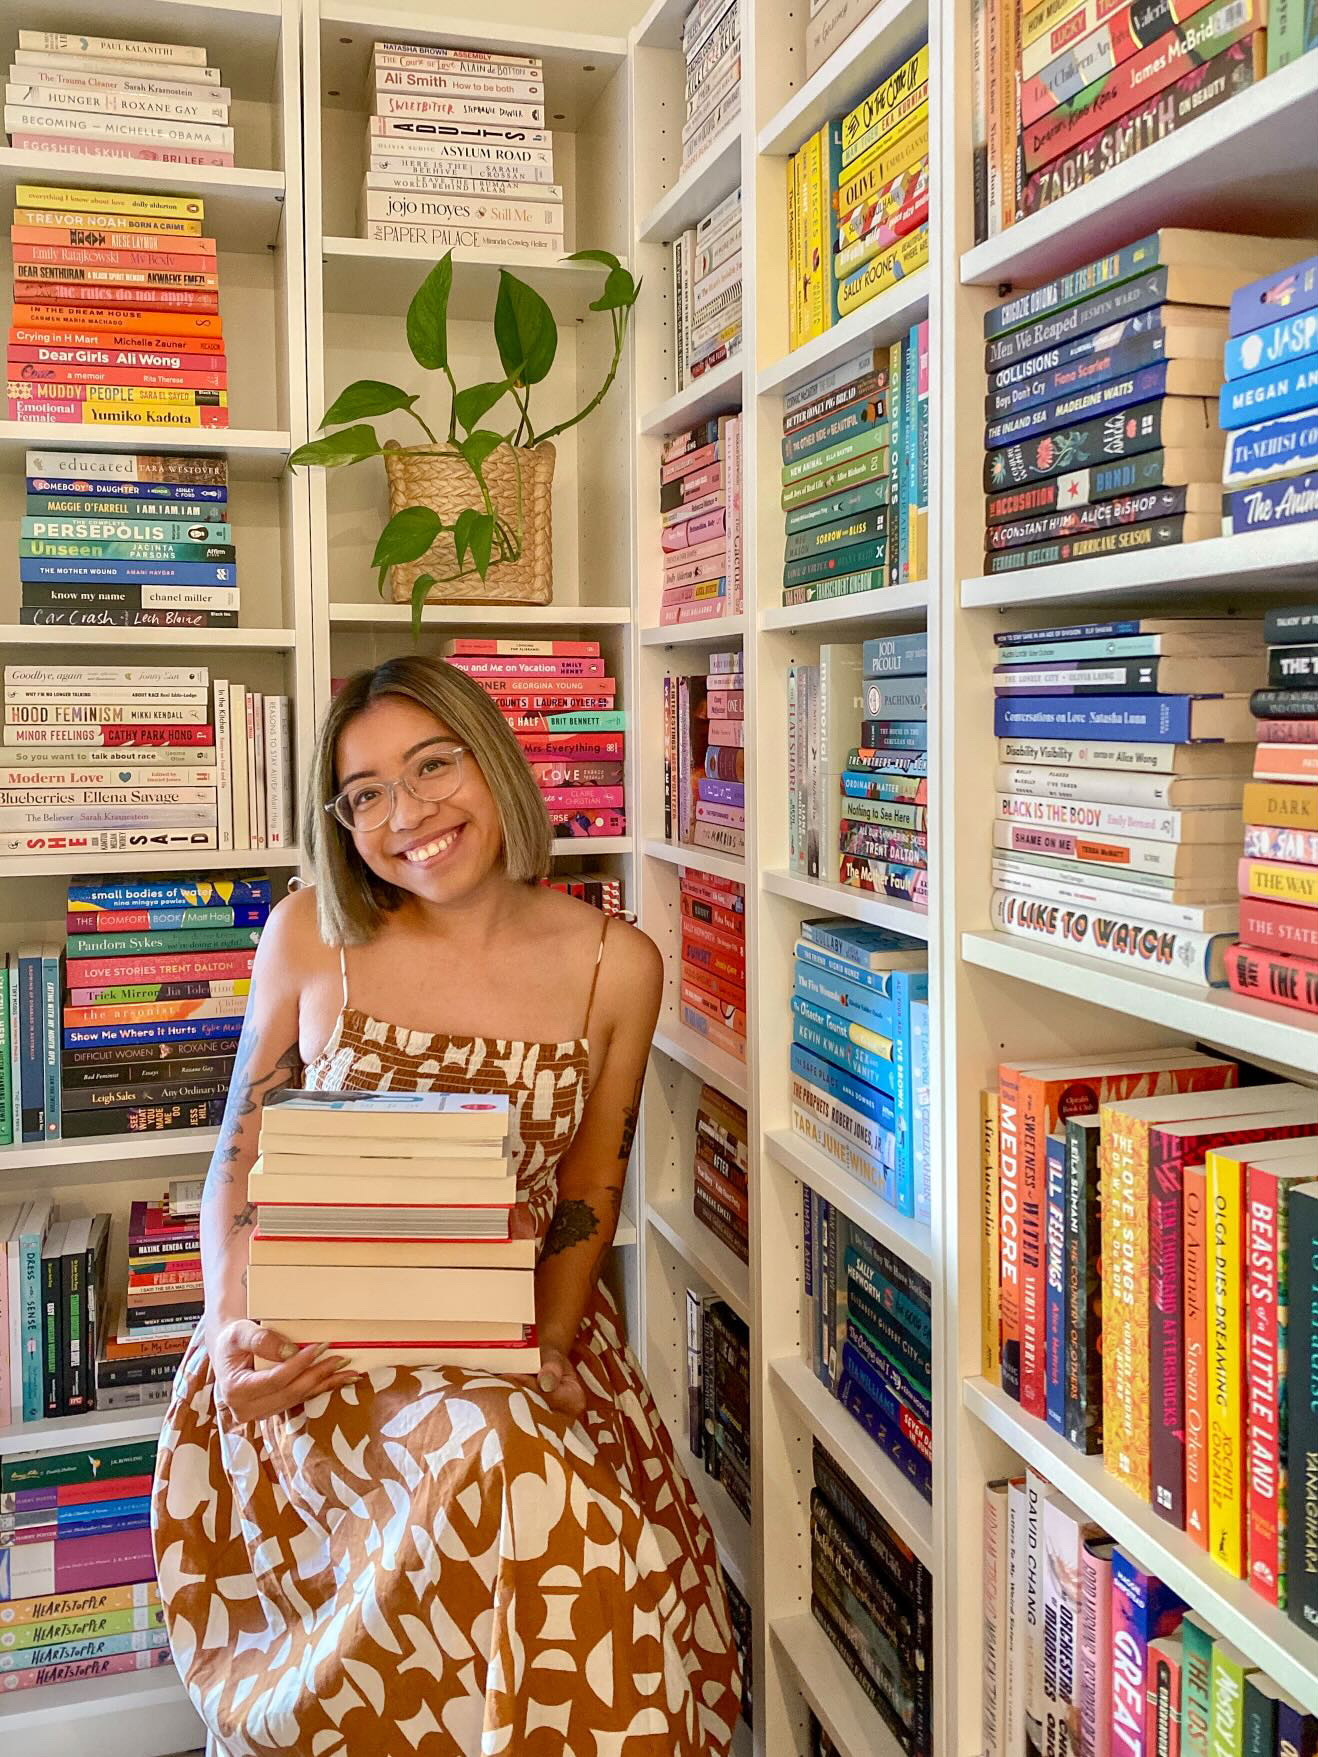 A young woman smiles as she holds a stack of books while standing in front of her towering, colourful bookshelves.